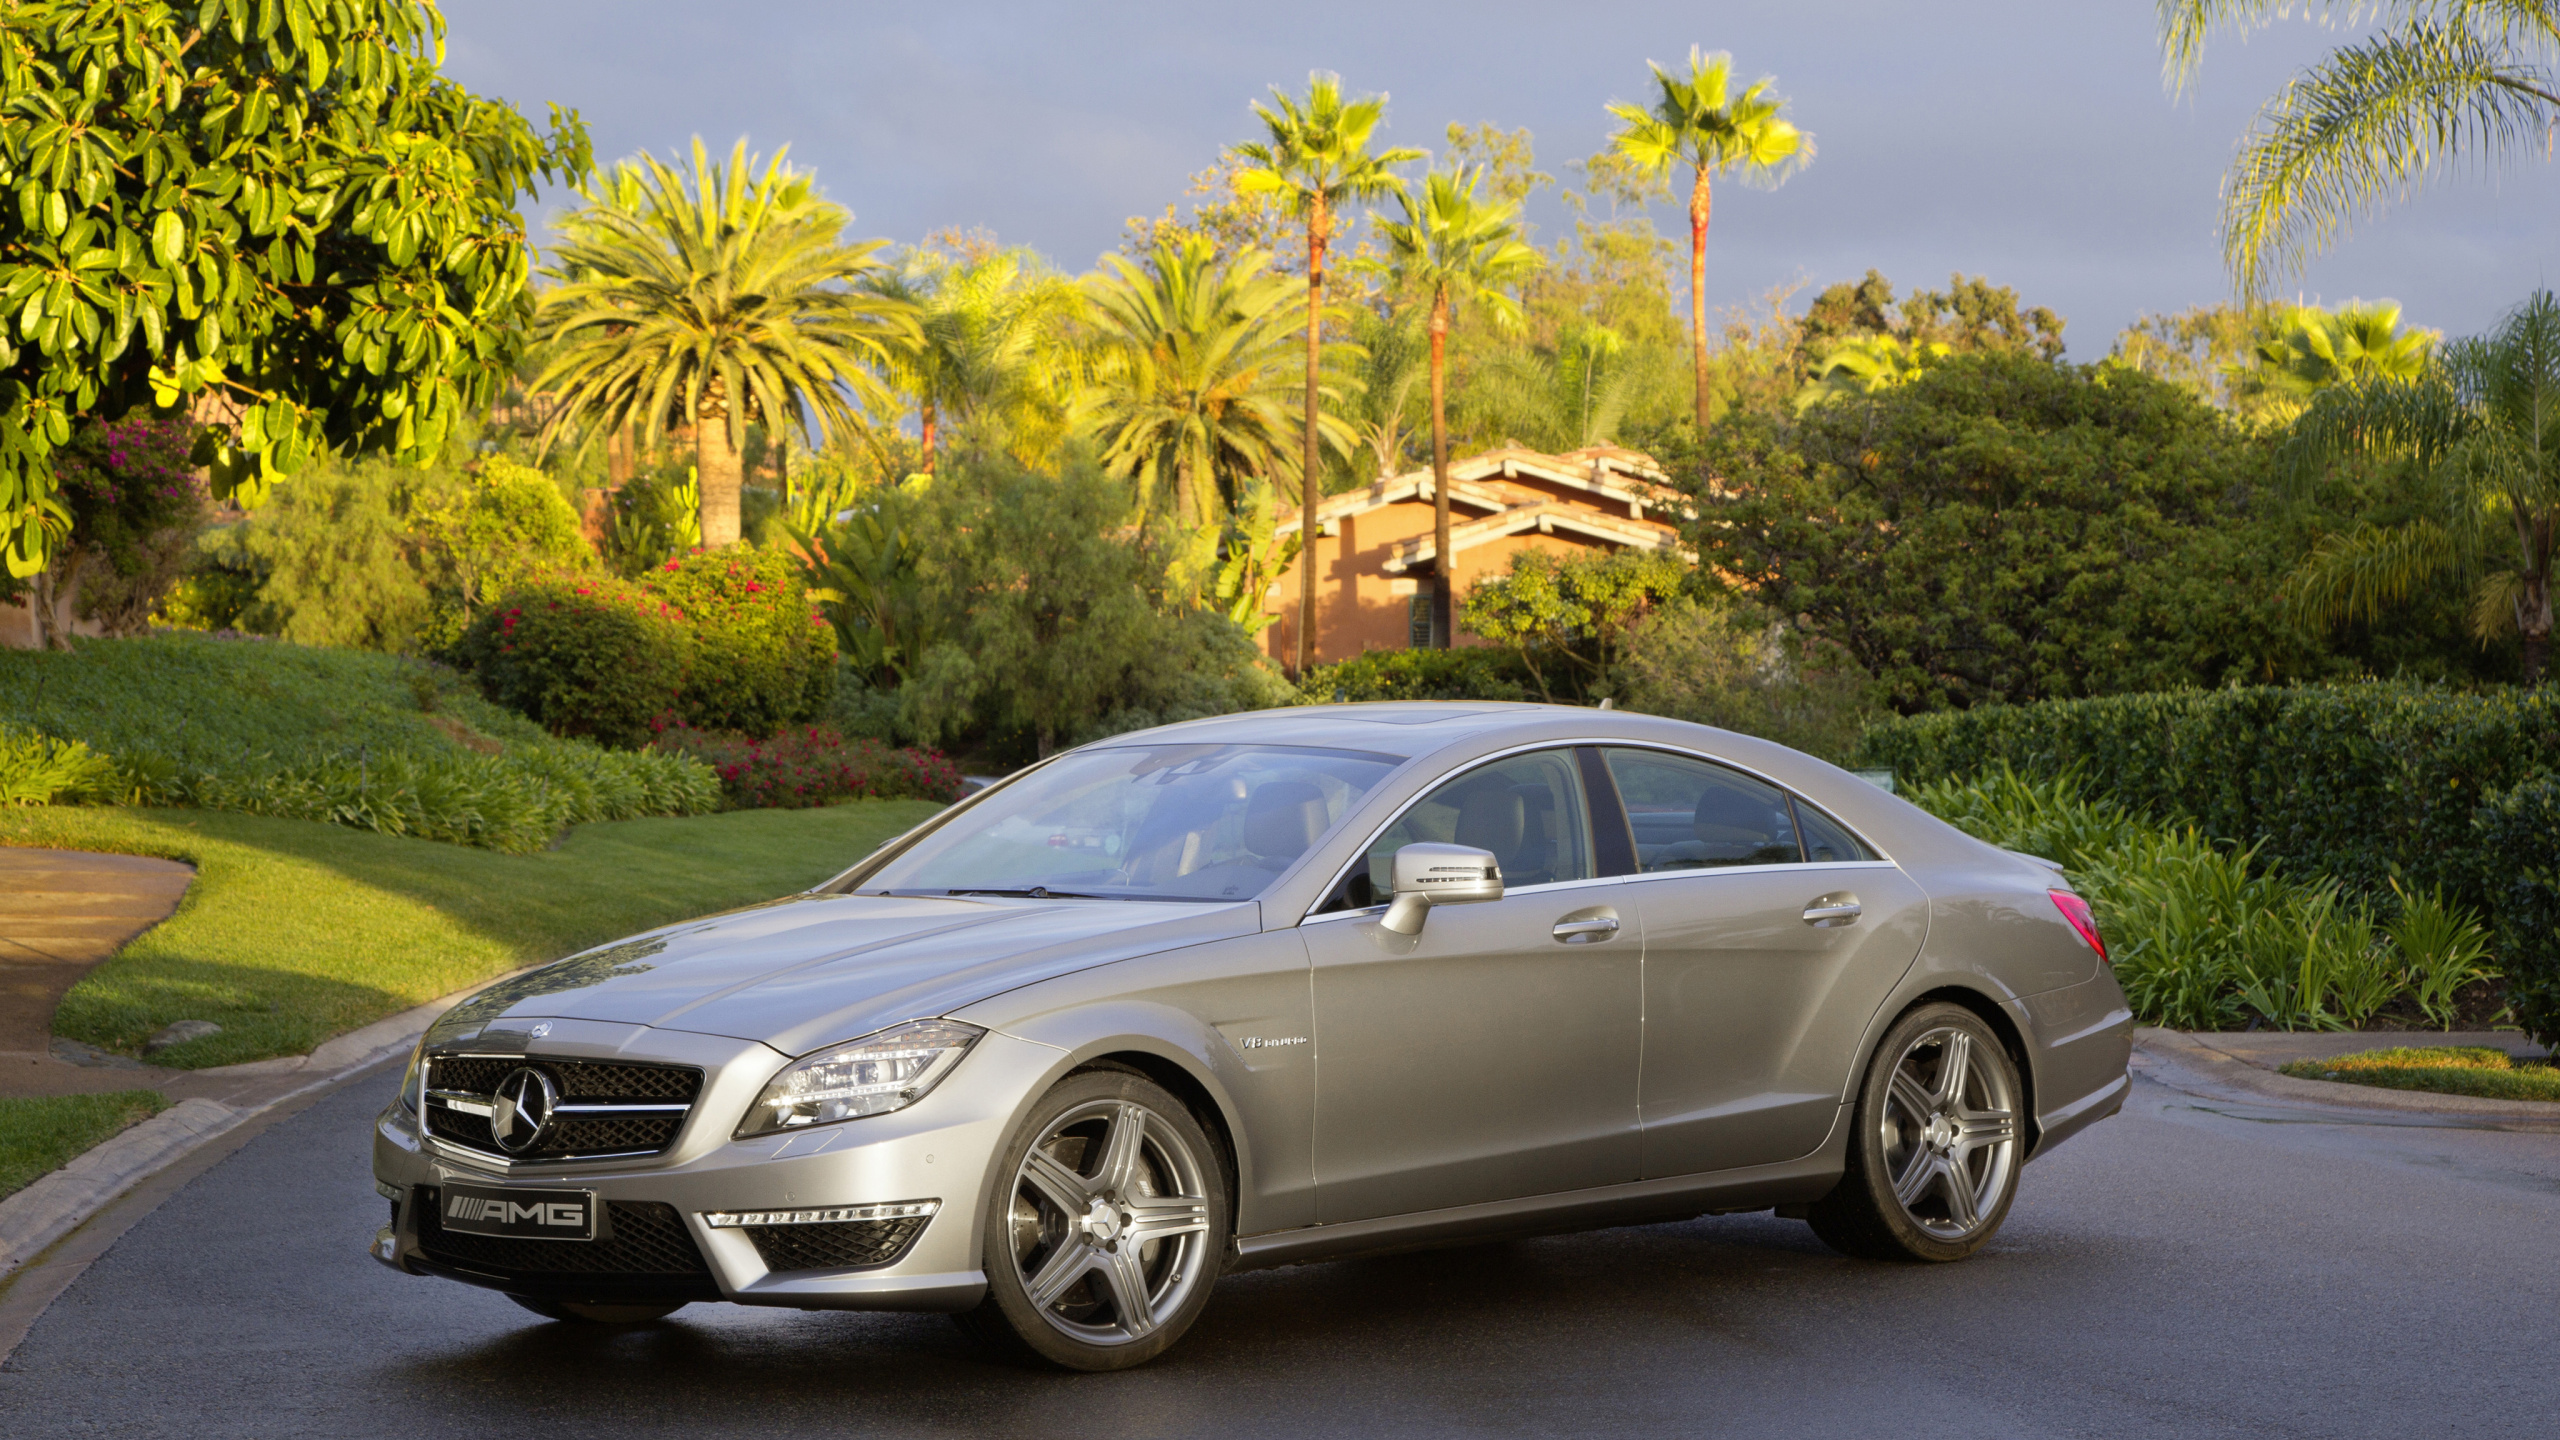 Gray Mercedes Benz Coupe on Road During Daytime. Wallpaper in 2560x1440 Resolution